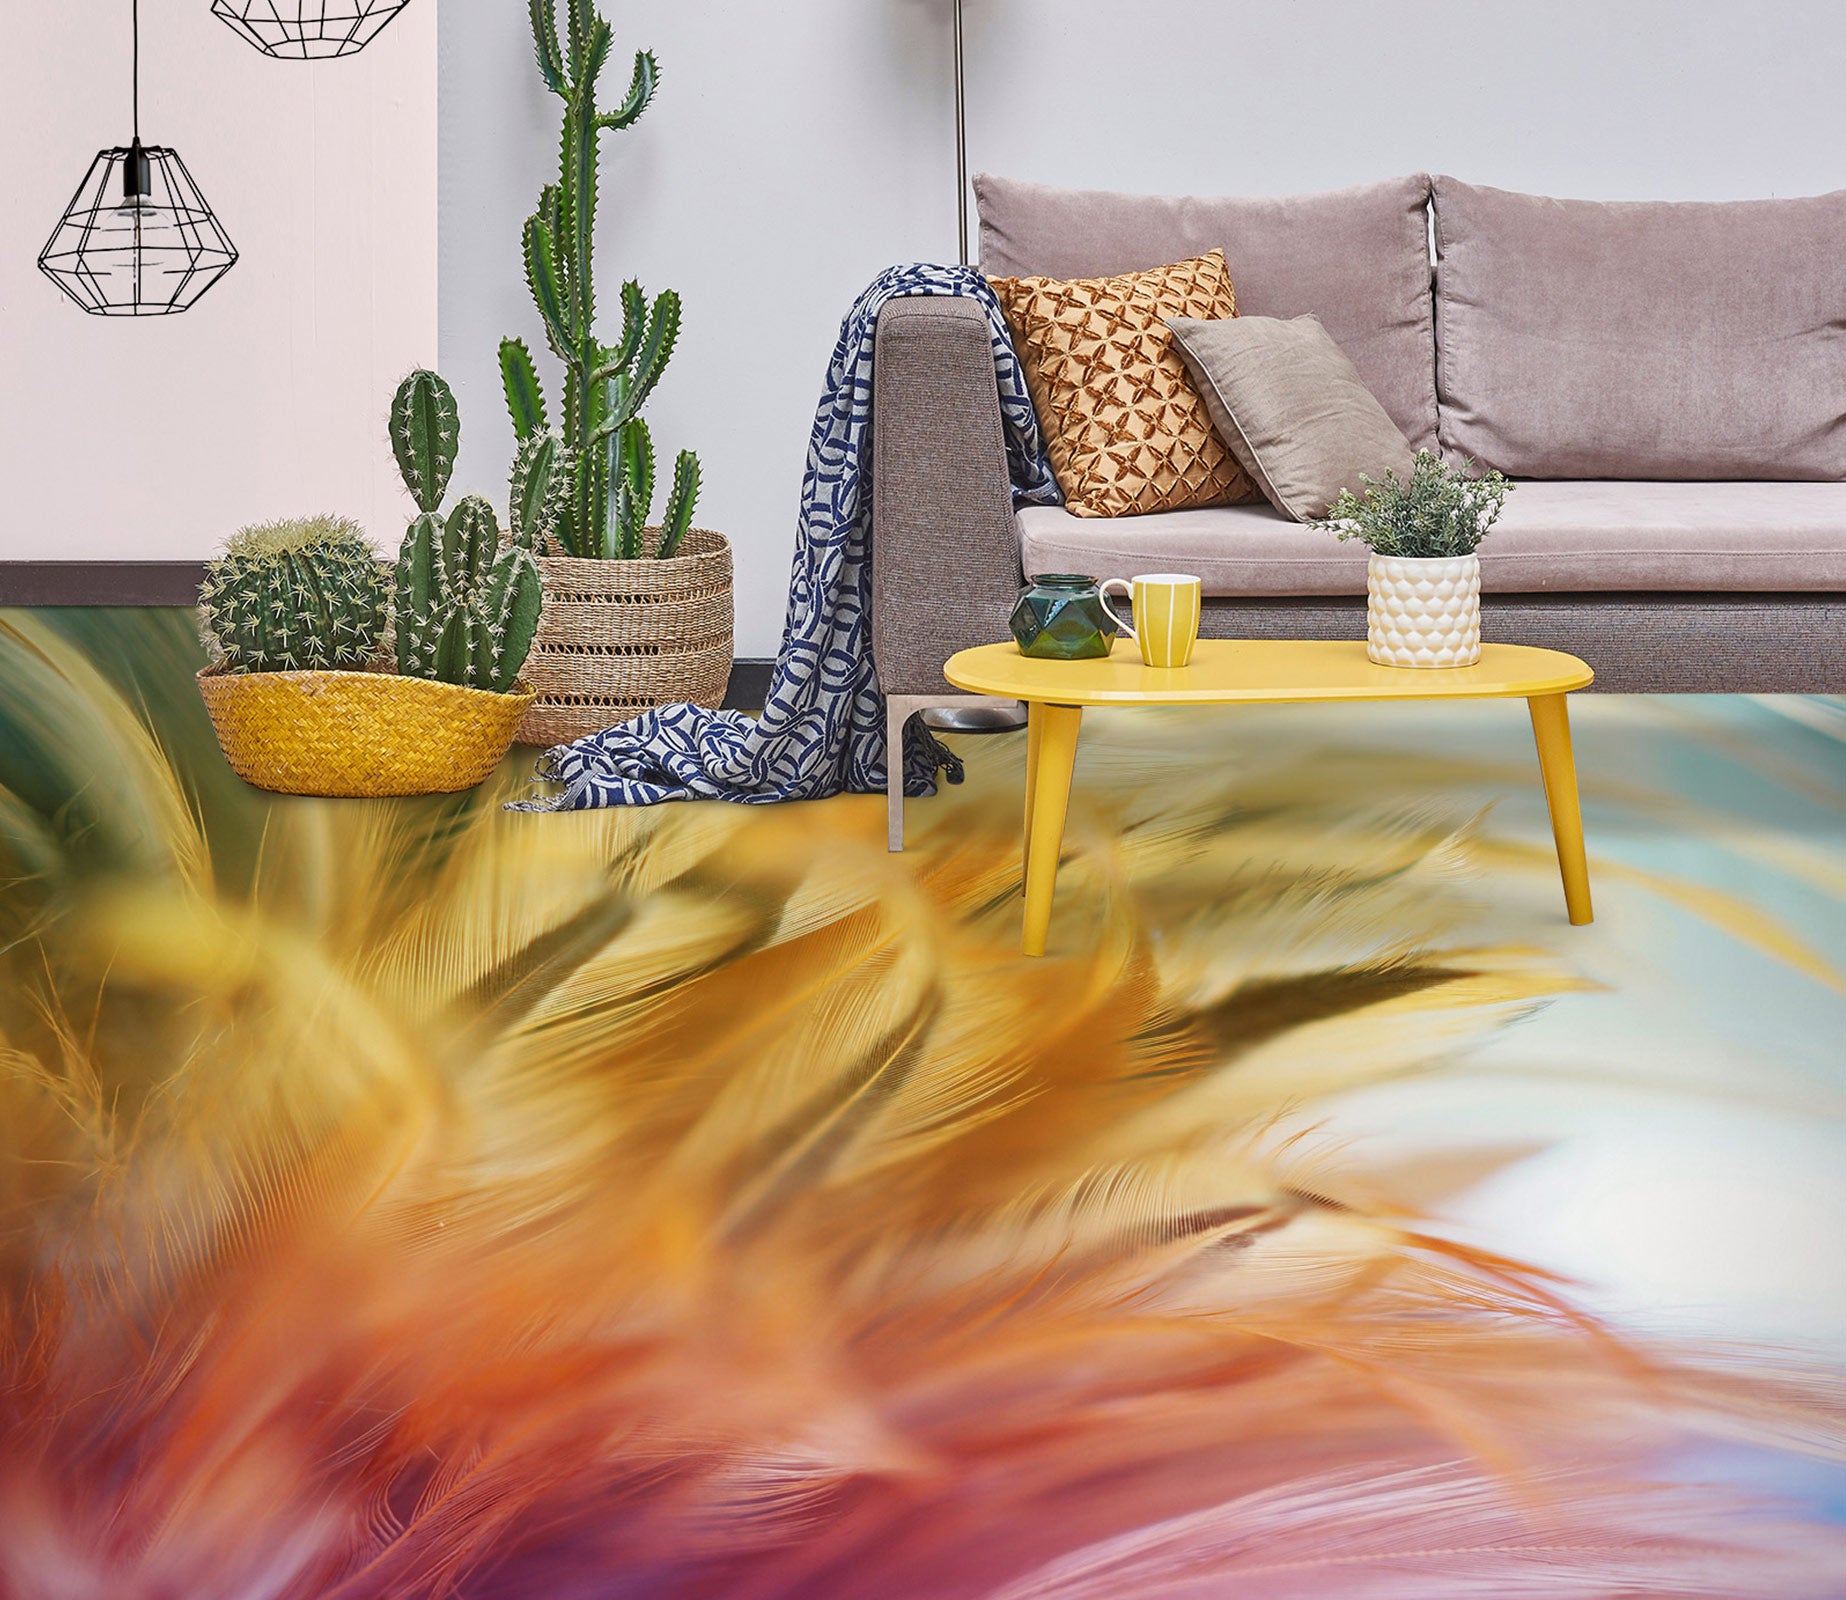 3D Yellow And Pink Feathers 1139 Floor Mural  Wallpaper Murals Self-Adhesive Removable Print Epoxy